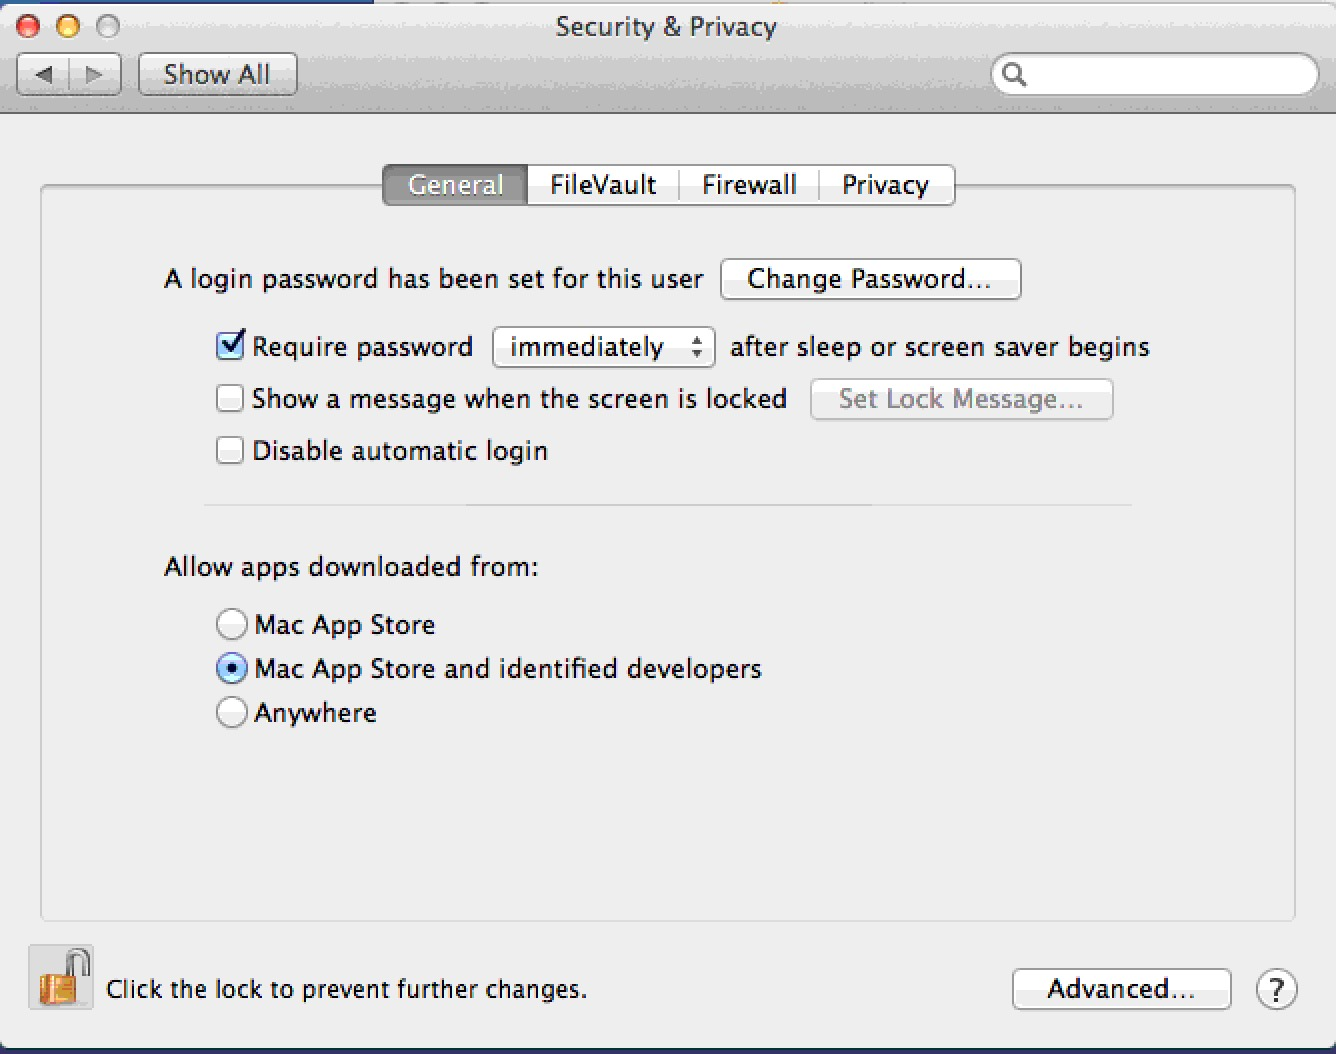 Sys Prefs >> Security & Privacy >> General Tab